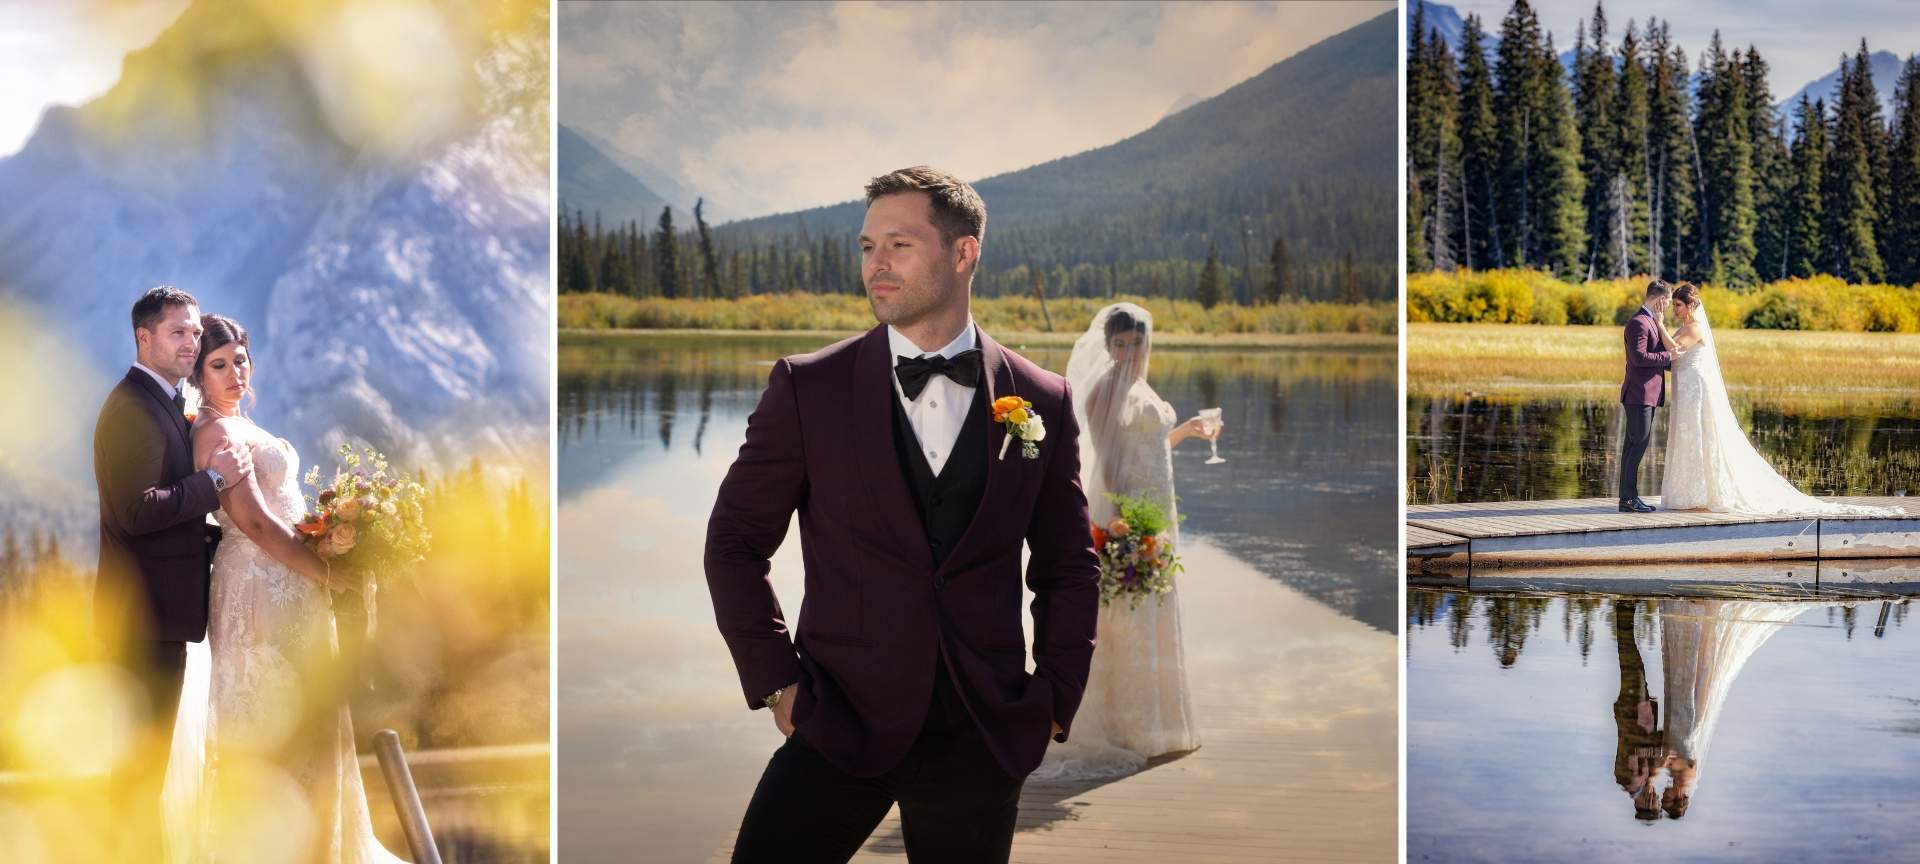 elope to the rocky mountains in canda - banff national park elopement